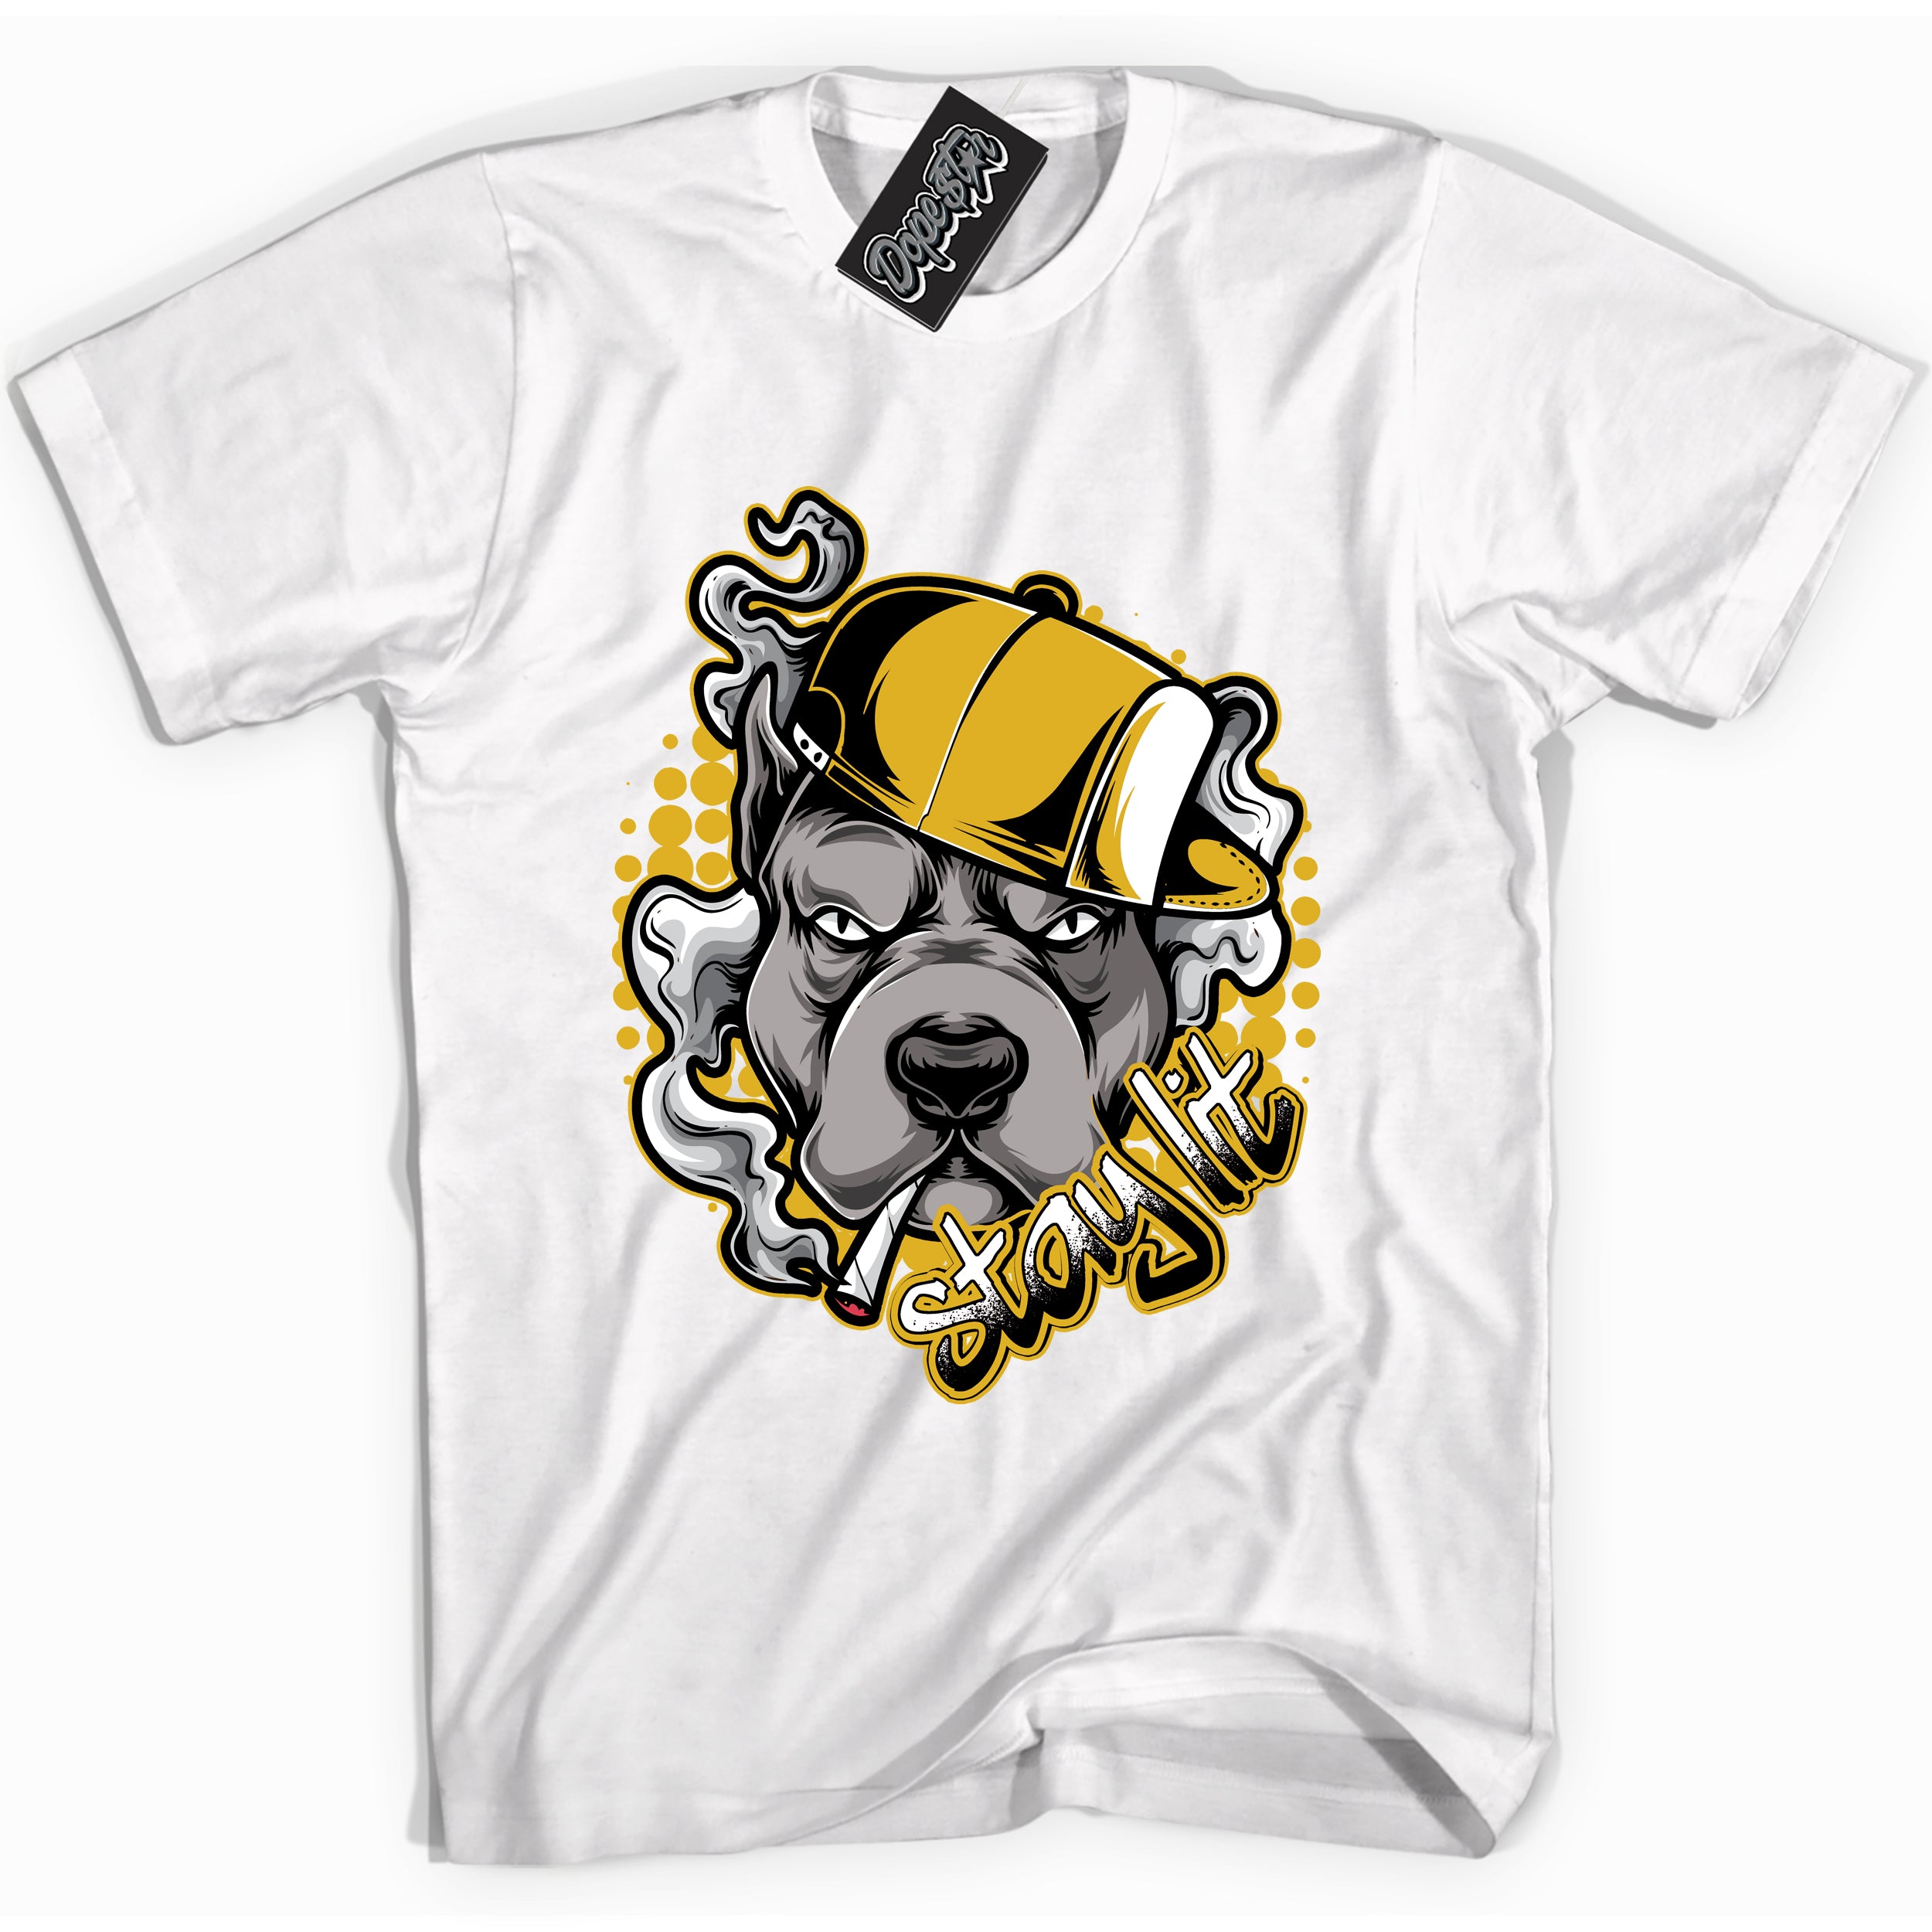 Cool White Shirt with “ Stay Lit” design that perfectly matches Yellow Ochre 6s Sneakers.